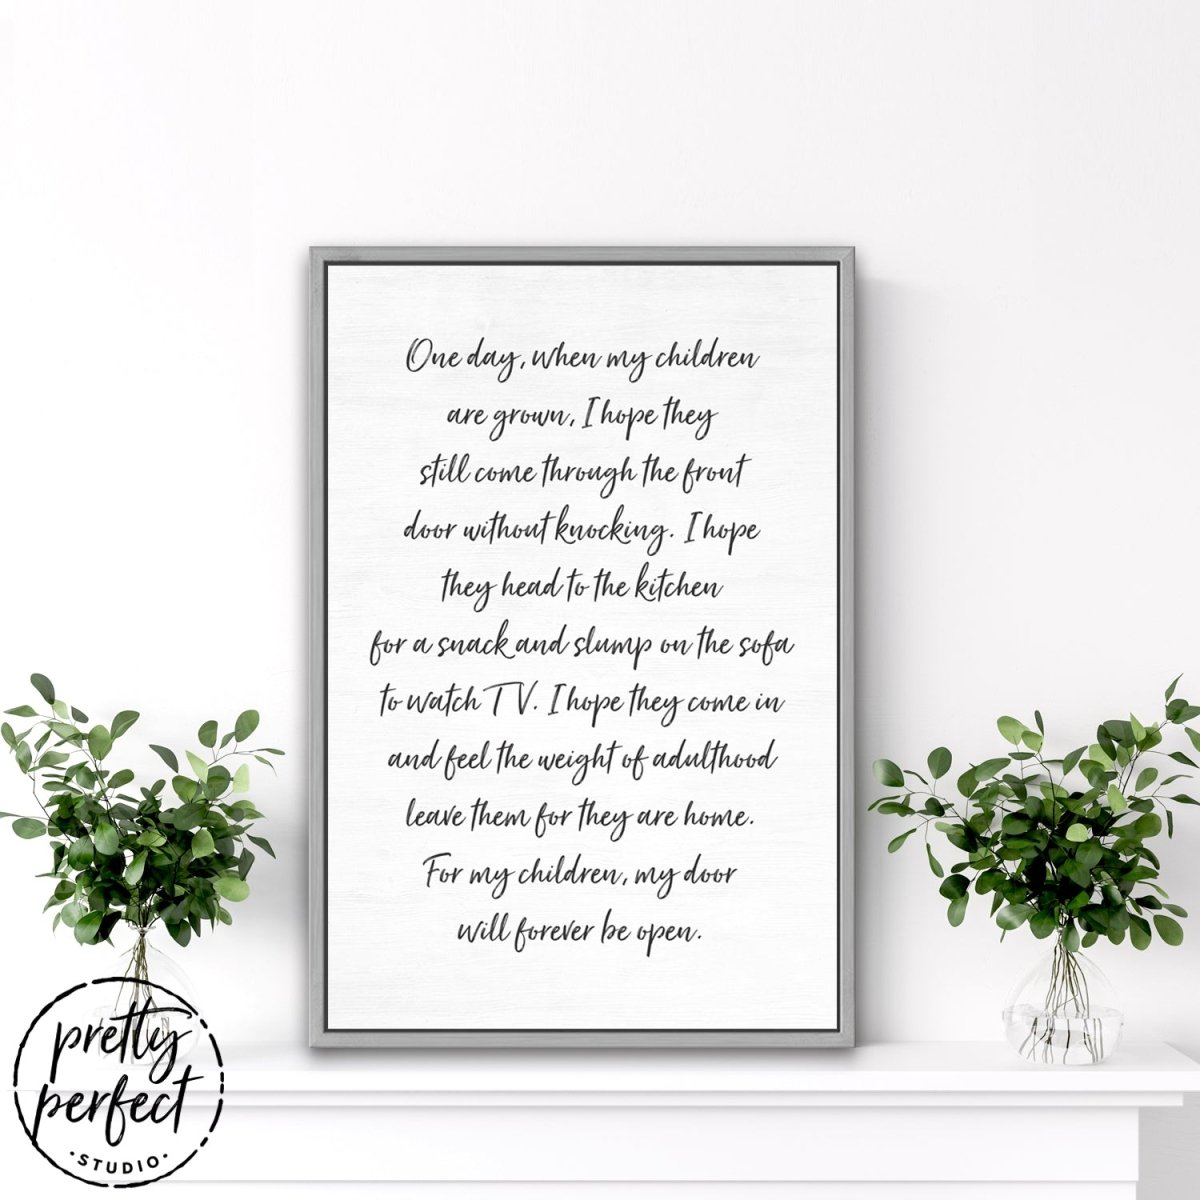 One Day When My Children Are Grown Canvas Sign Hanging Above Shelf - Pretty Perfect Studio